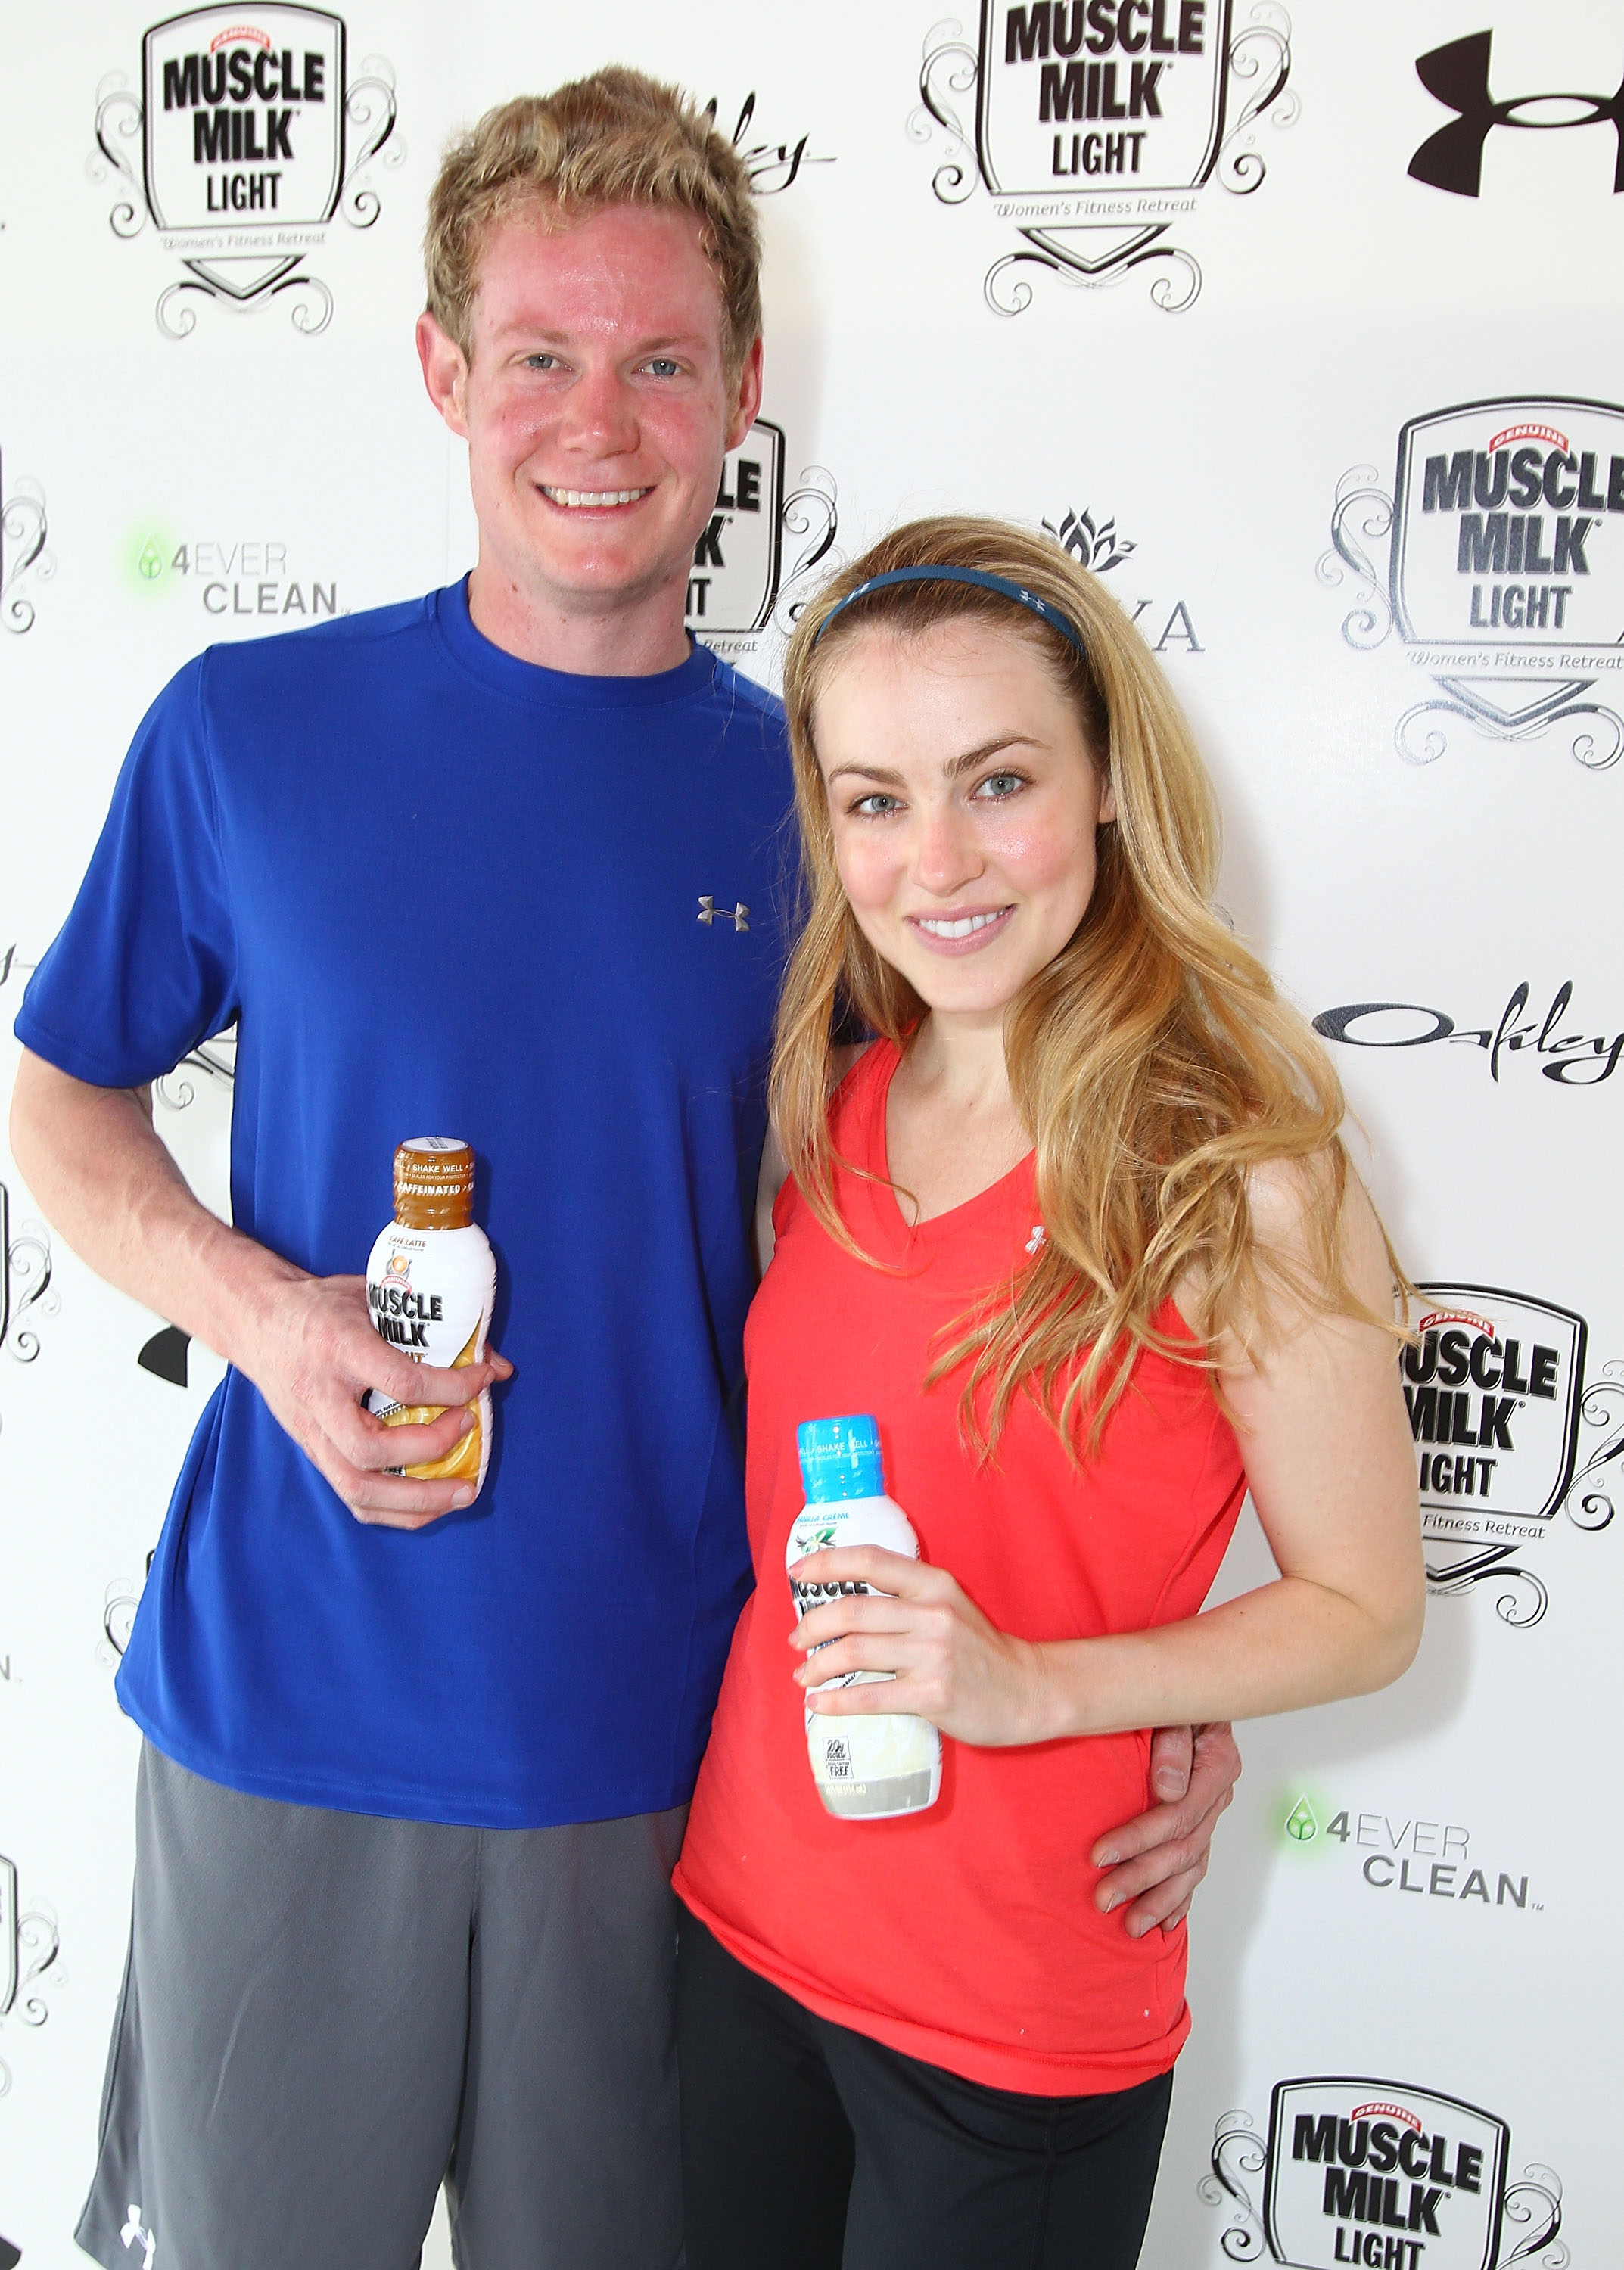 George Wilson and Amanda Schull on Day 2 of The 1st Annual "Muscle Milk Light" Women's Fitness Retreat at a Private Residence on June 2, 2010, in Beverly Hills, California. | Source: Getty Images